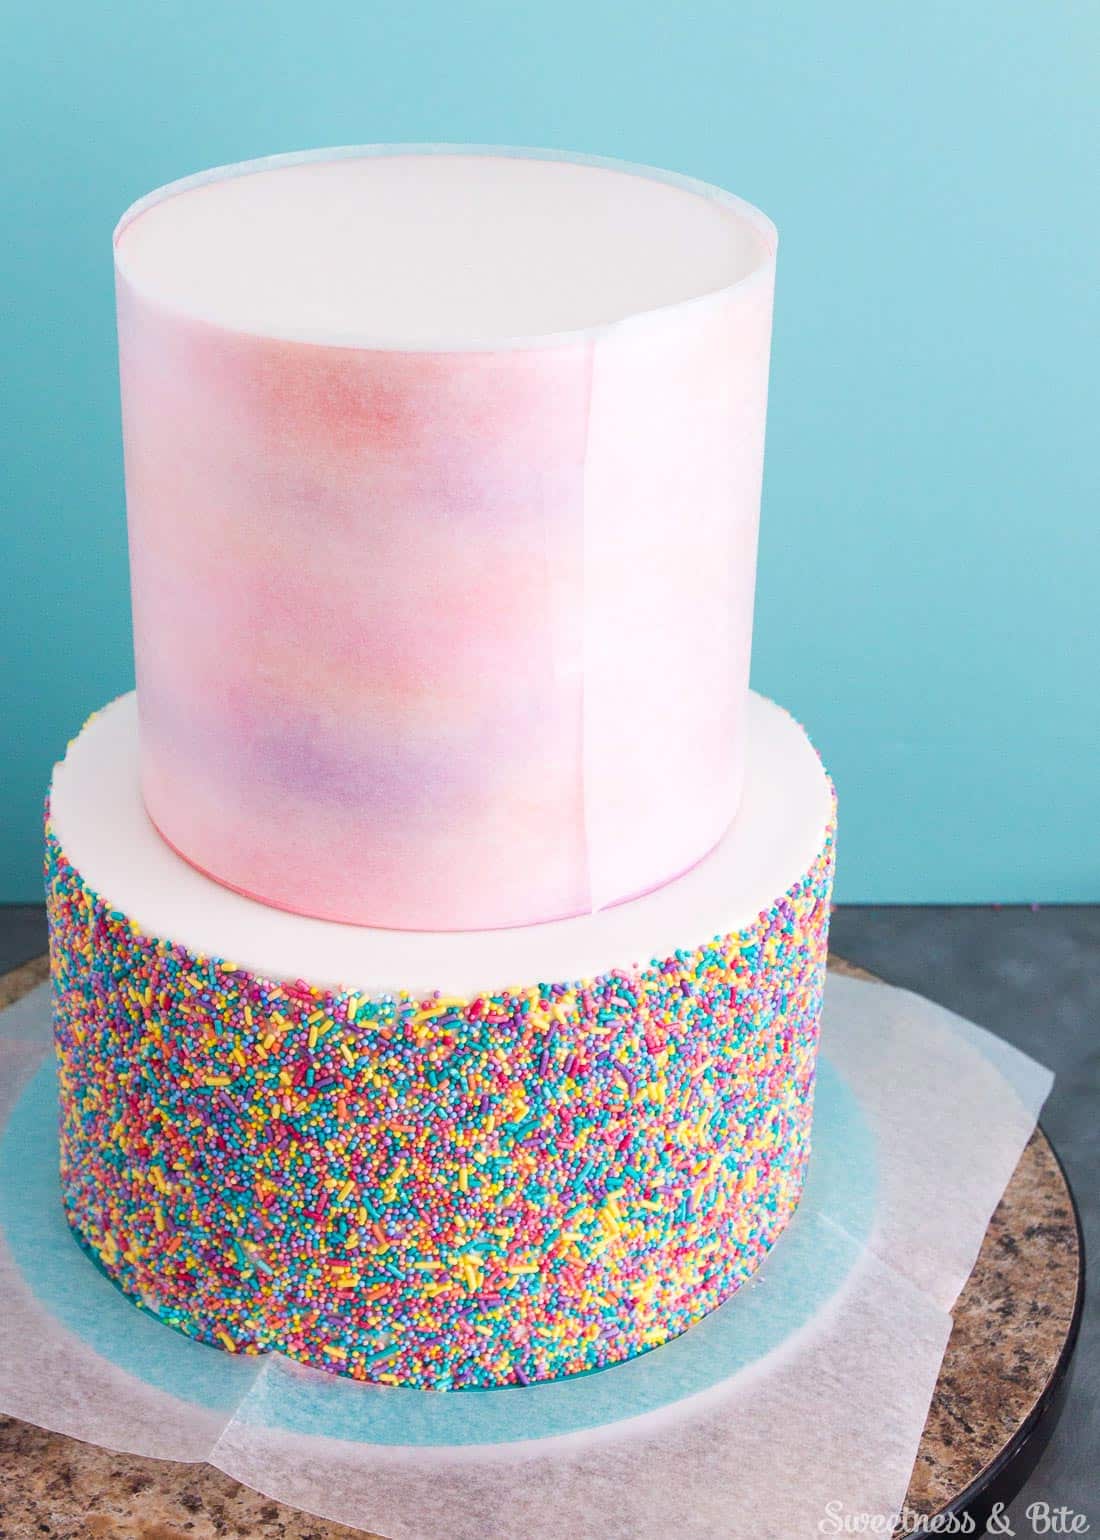 Sprinkle Cake Tutorial - A step by step guide to applying sprinkles to a fondant covered cake ~ Sweetness and Bite